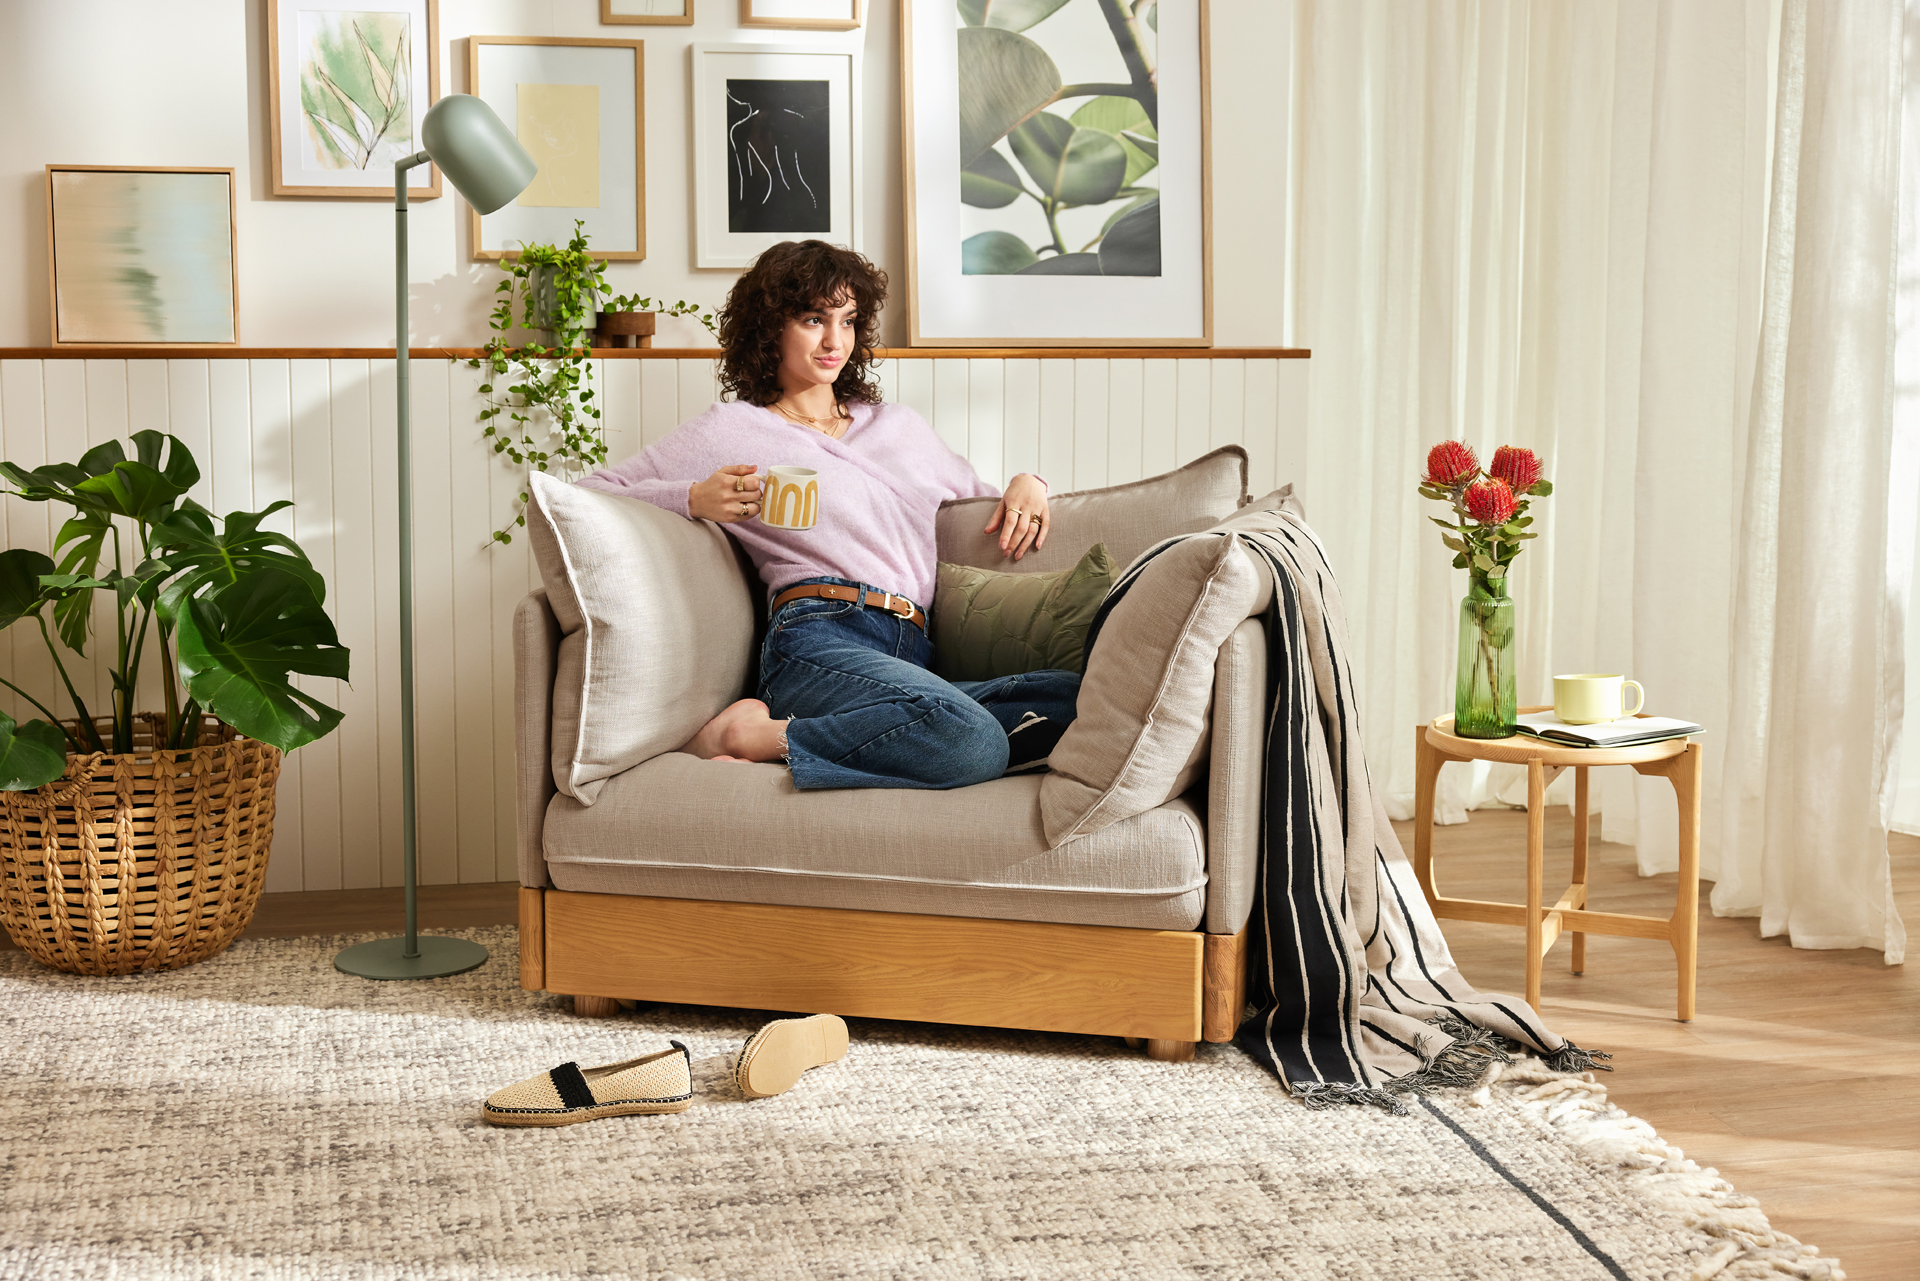 A woman relaxes on a Koala armchair in a living room with wall art, rug, plants and accessories